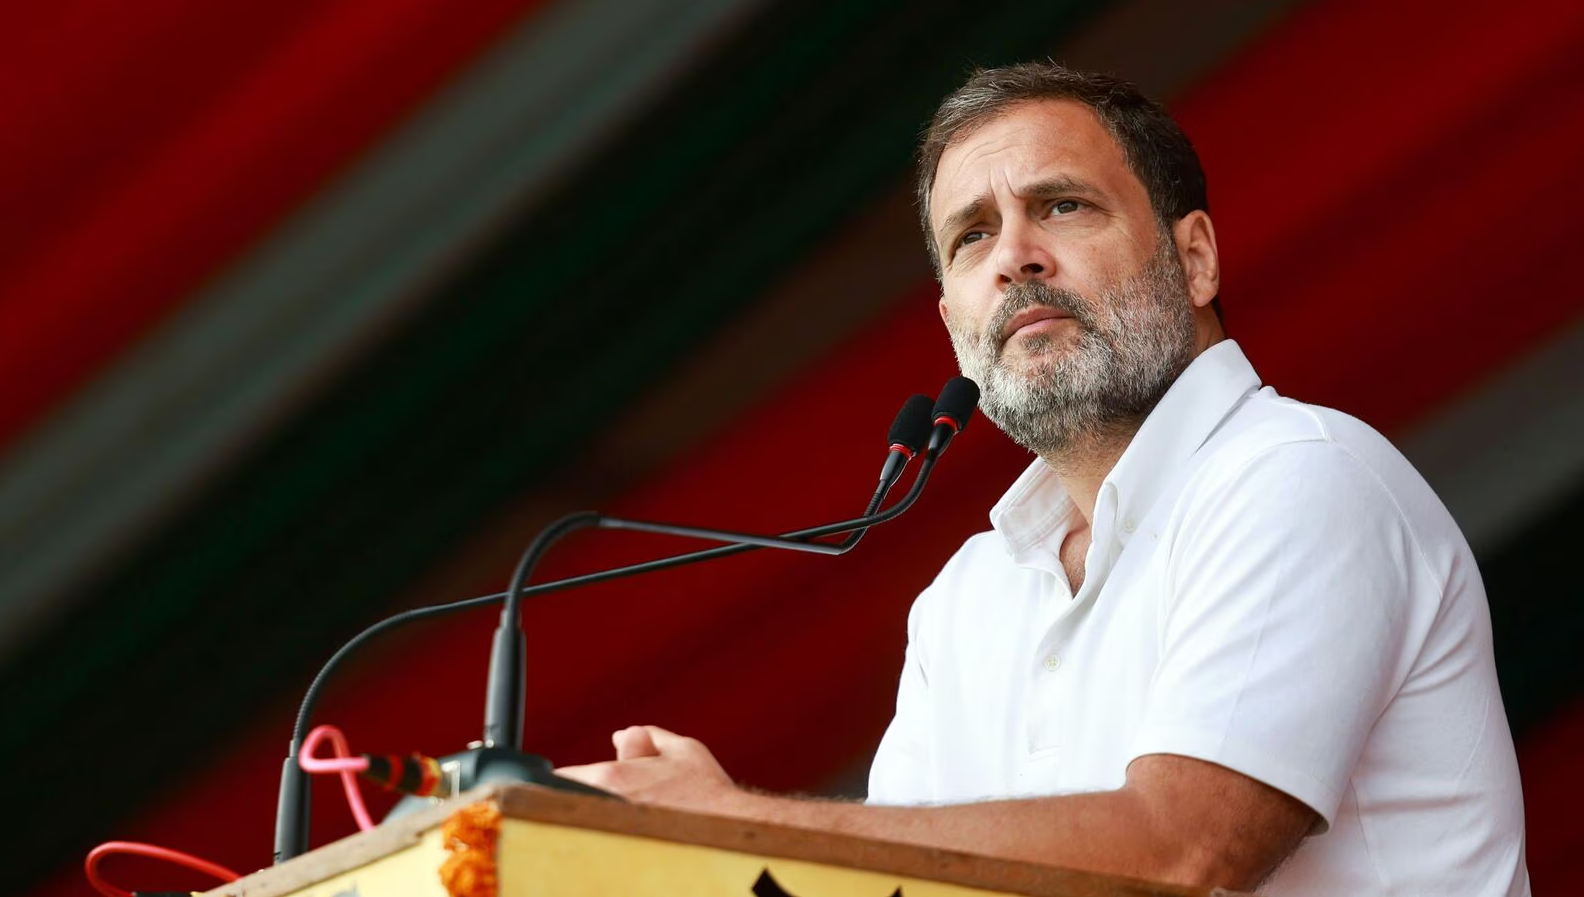 Rahul Gandhi Proposes 50% Reservation For Women, If Voted